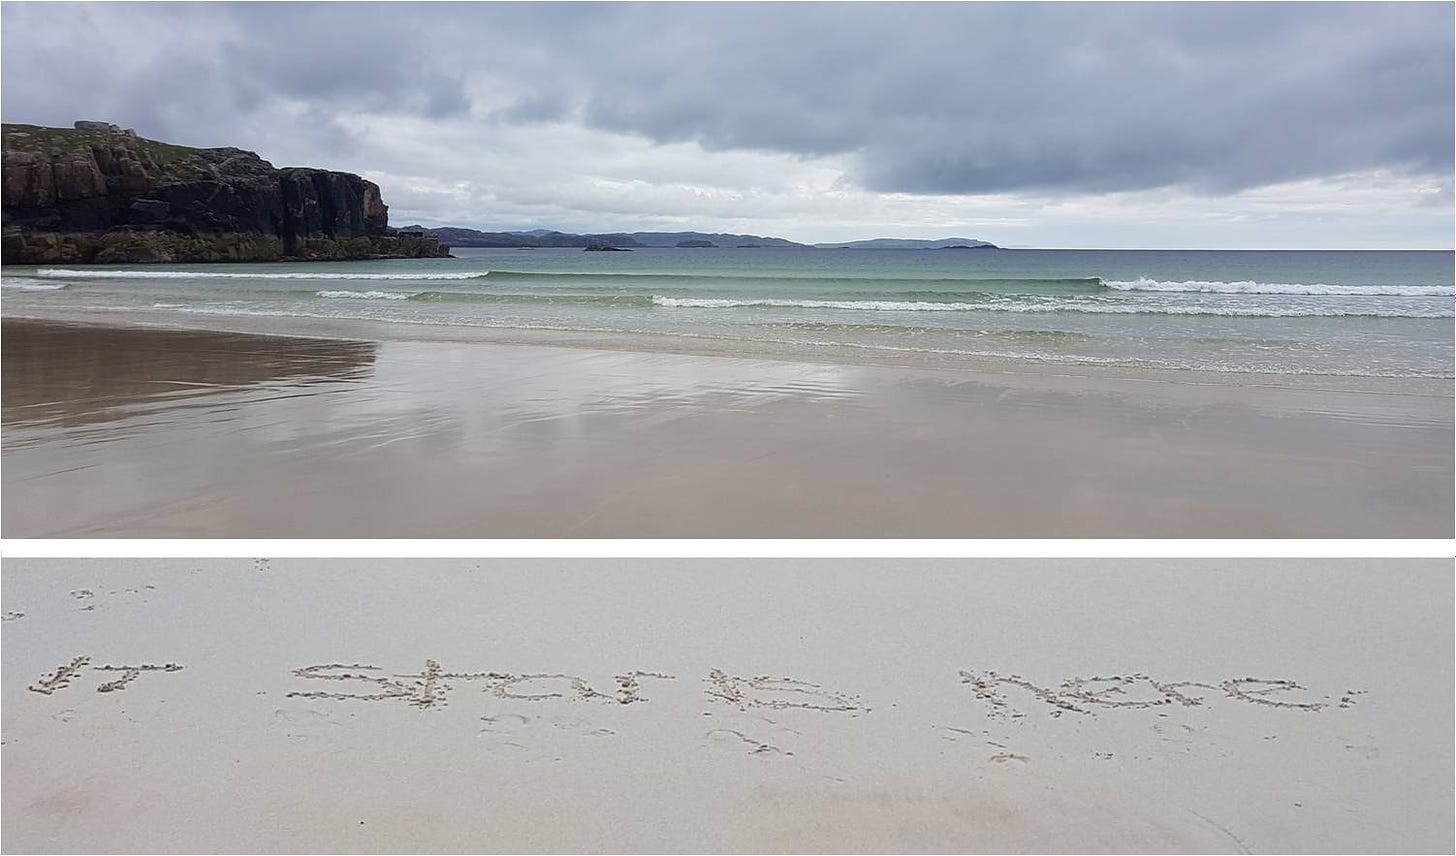 Remote beach in Scotland under moody skies, with "It starts here" written on the sand.